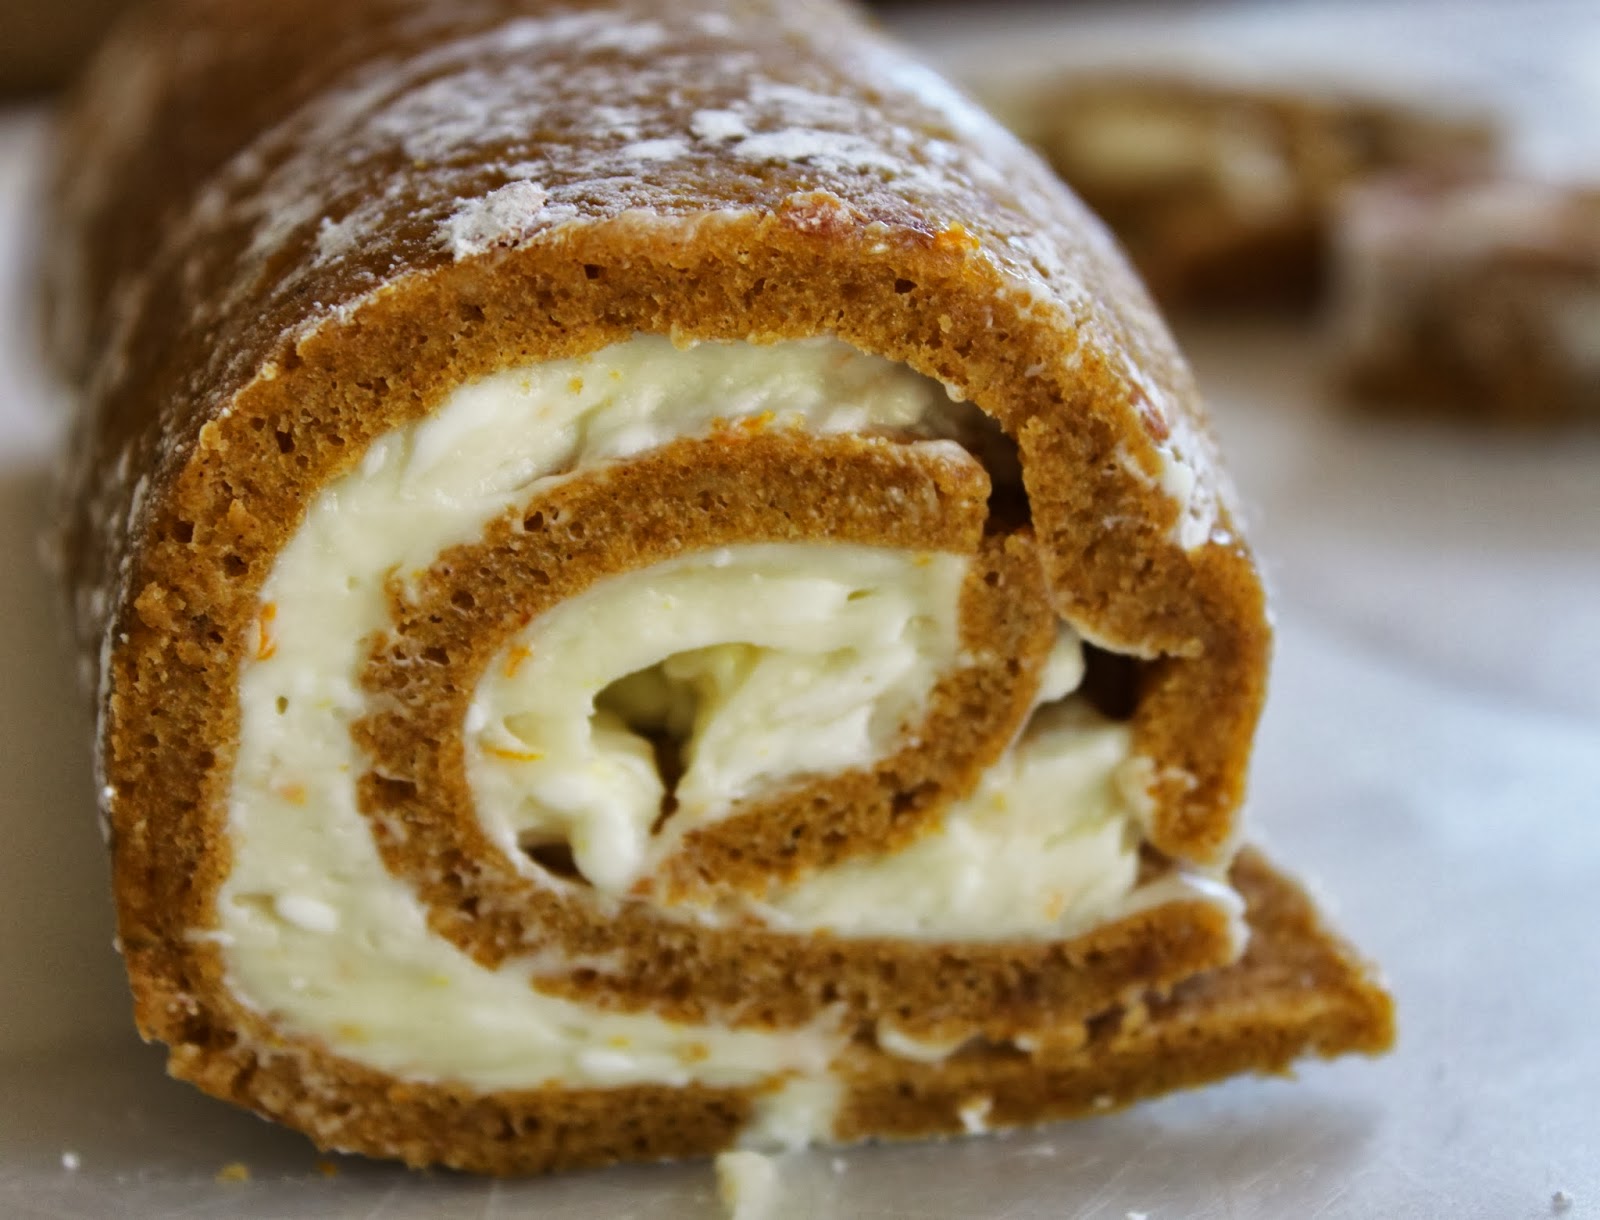 Classic Pumpkin Roll with Orange Cream Cheese Filling.